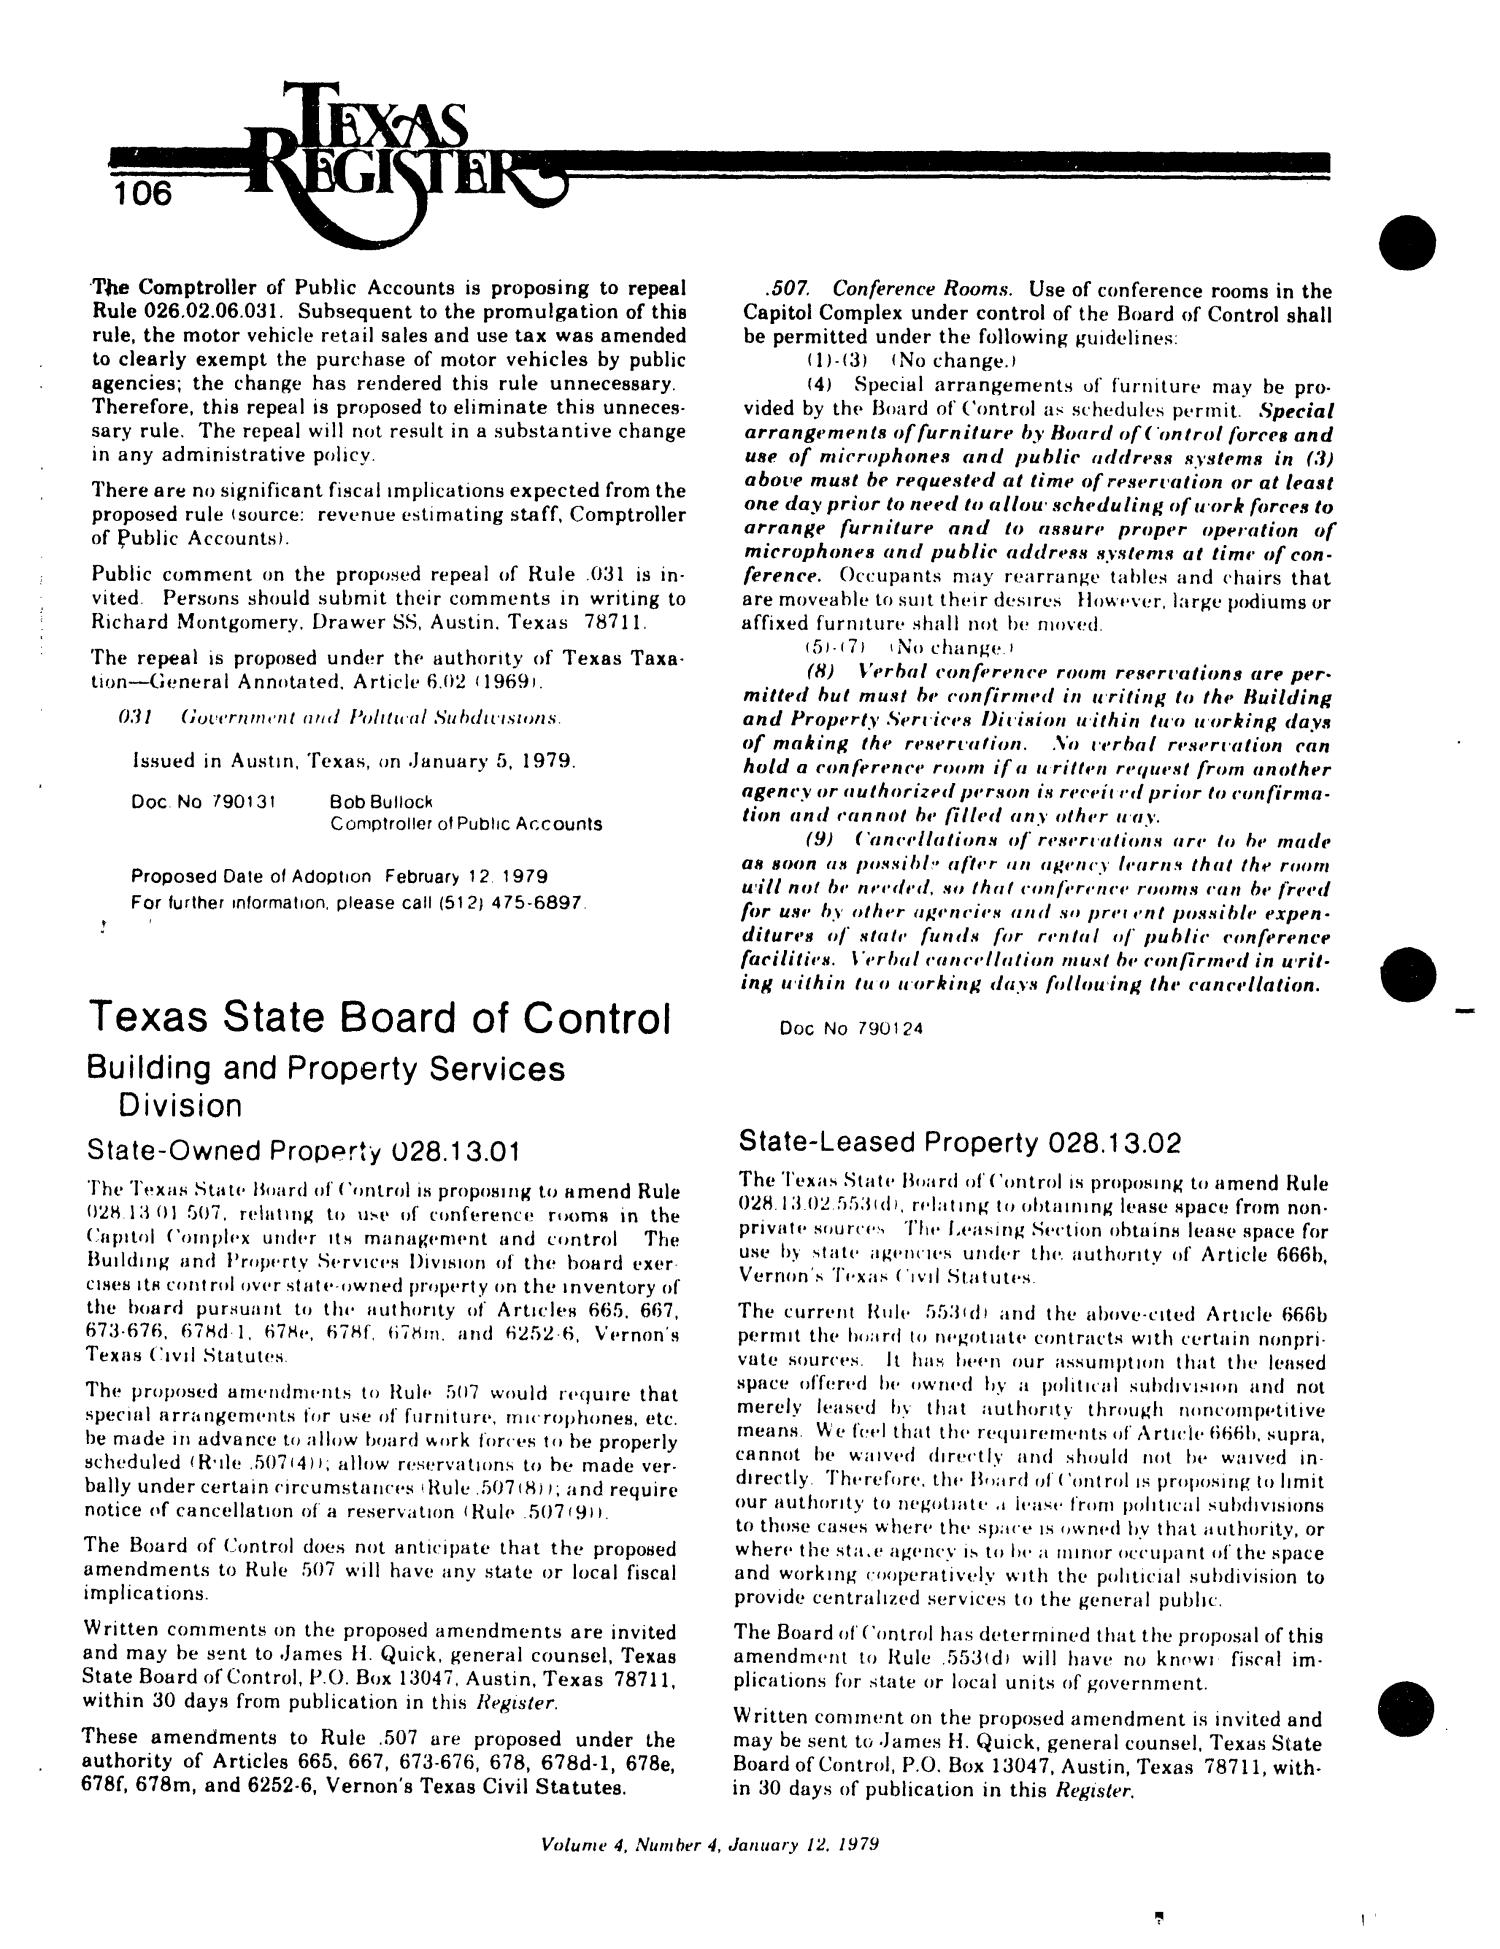 Texas Register, Volume 4, Number 4, Pages 93-122, January 12, 1979
                                                
                                                    106
                                                